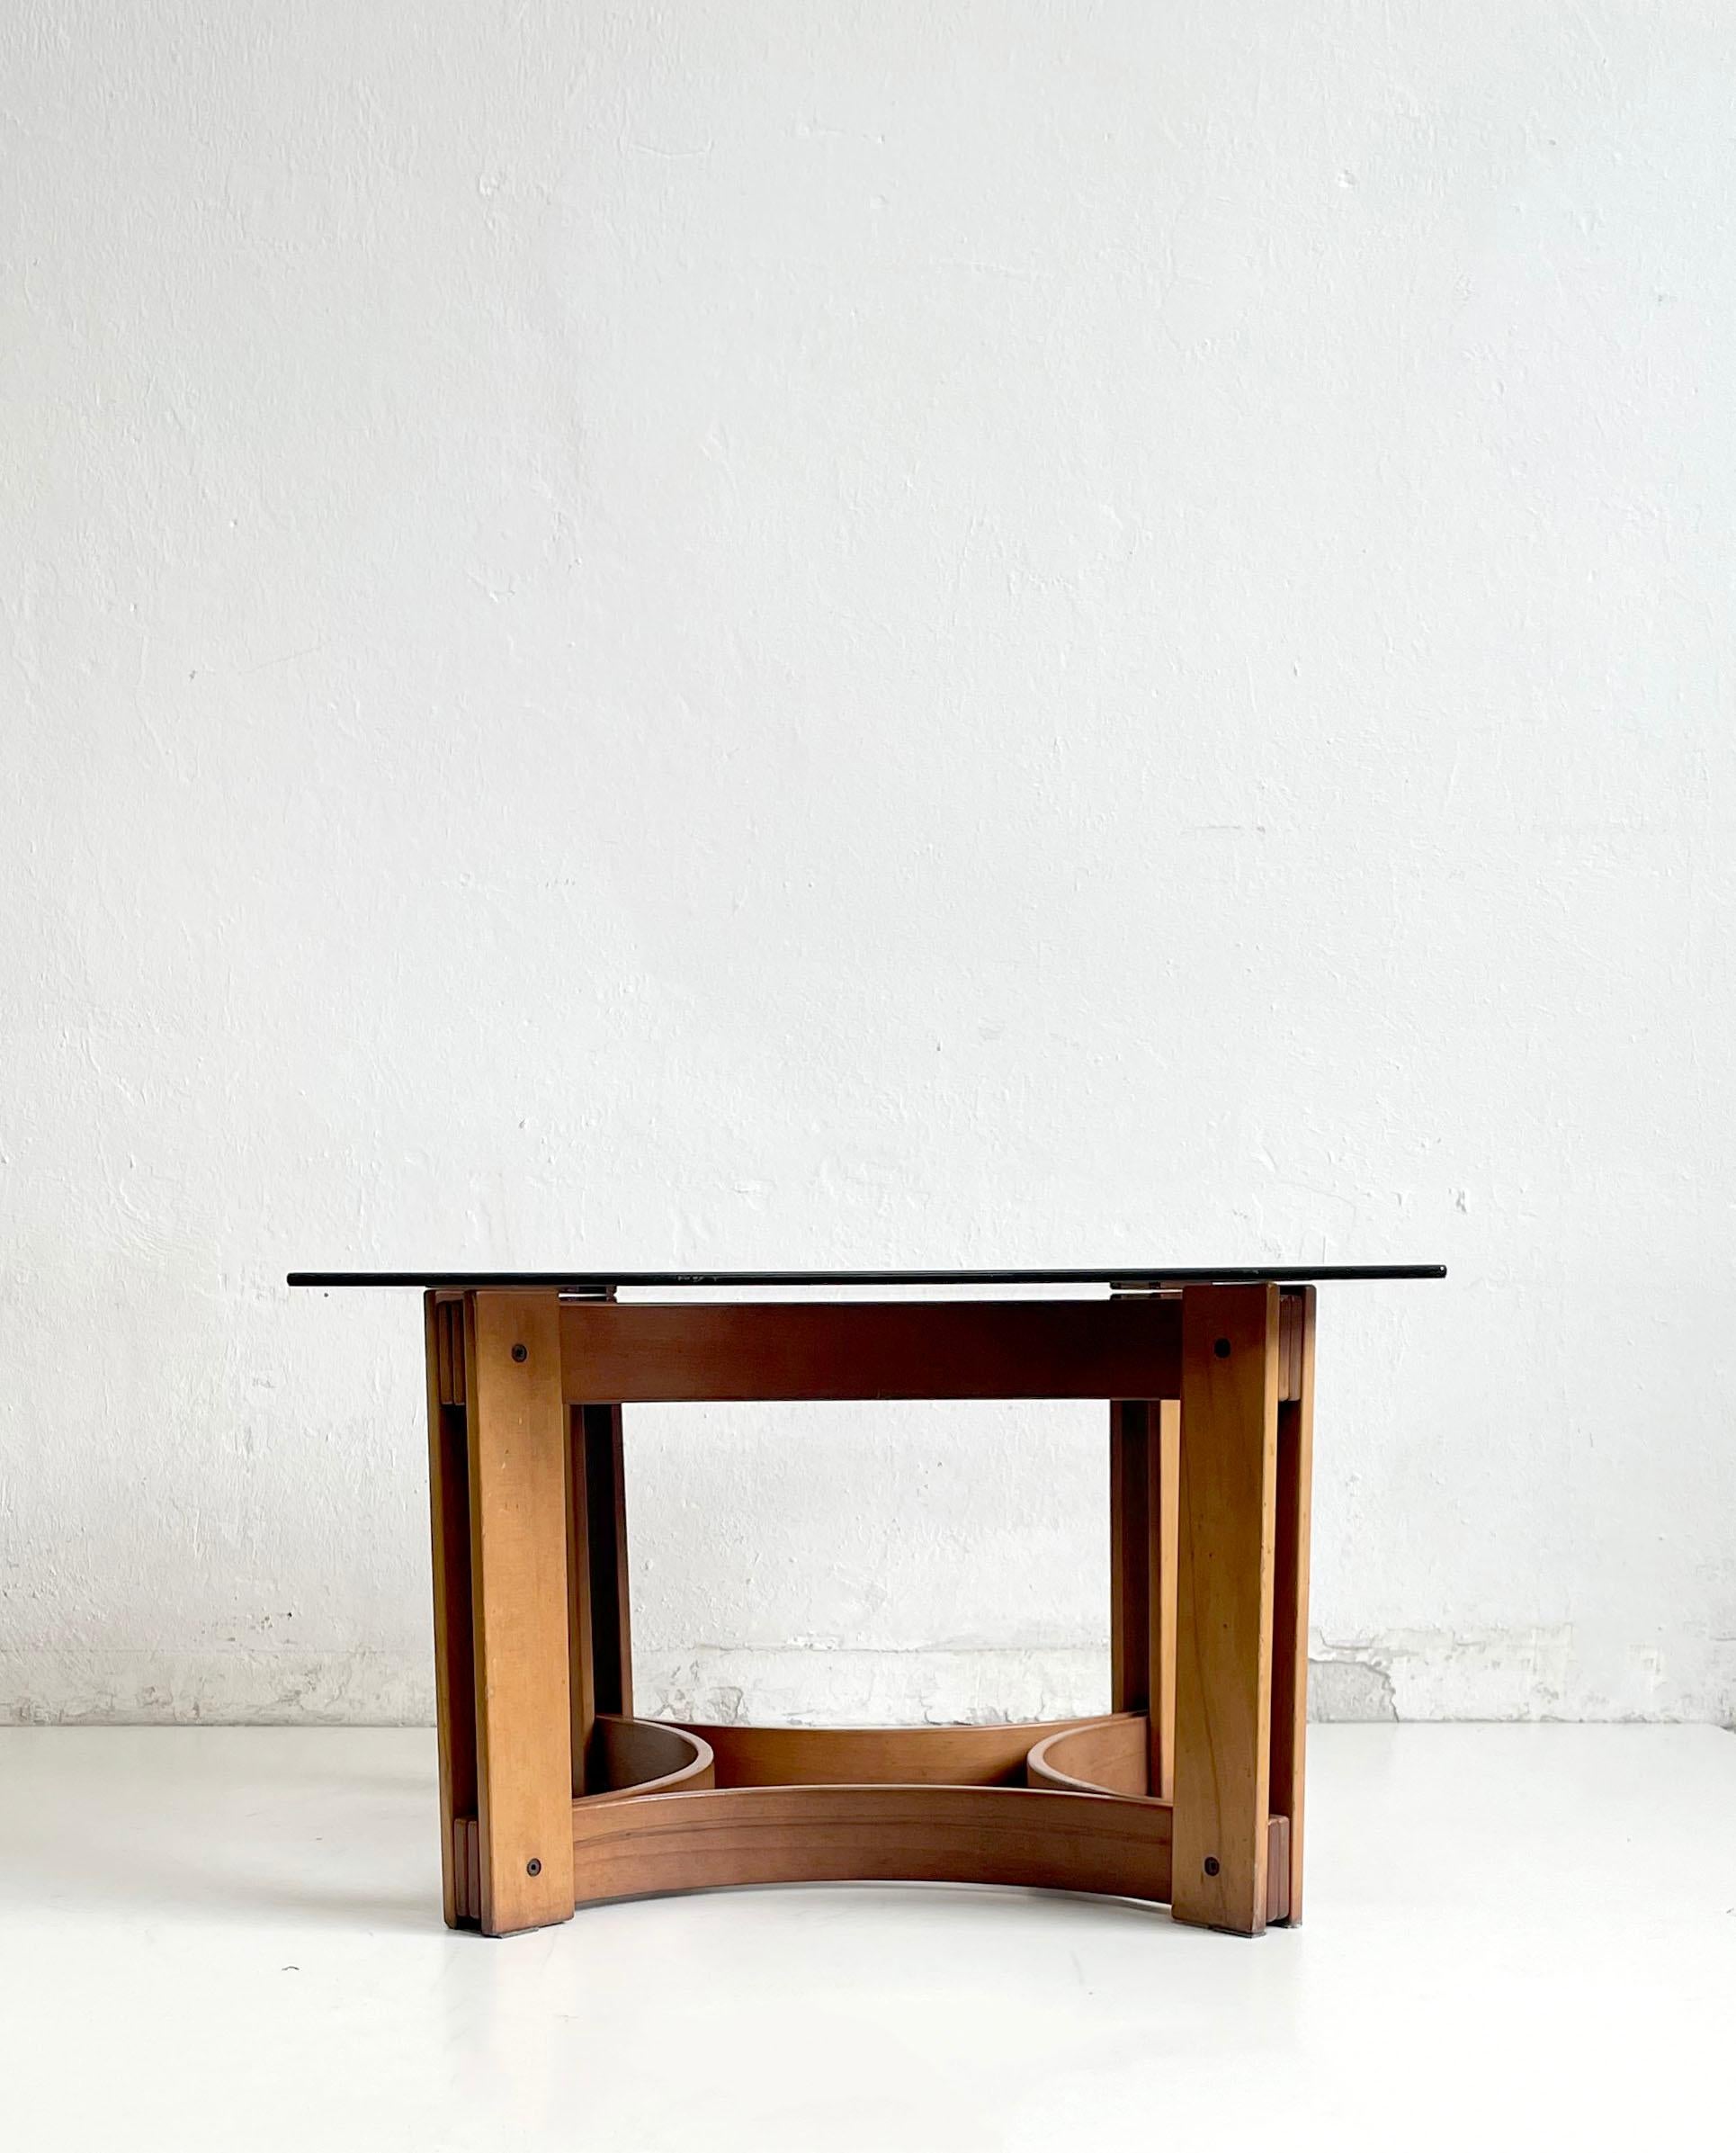 Modernist coffee table with sculptural geometric bentwood base and a freestanding tinted glass top

Modernist Scandinavian design, unknown designer and maker

The table base can be disassembled for safer transport

The table remains in a very